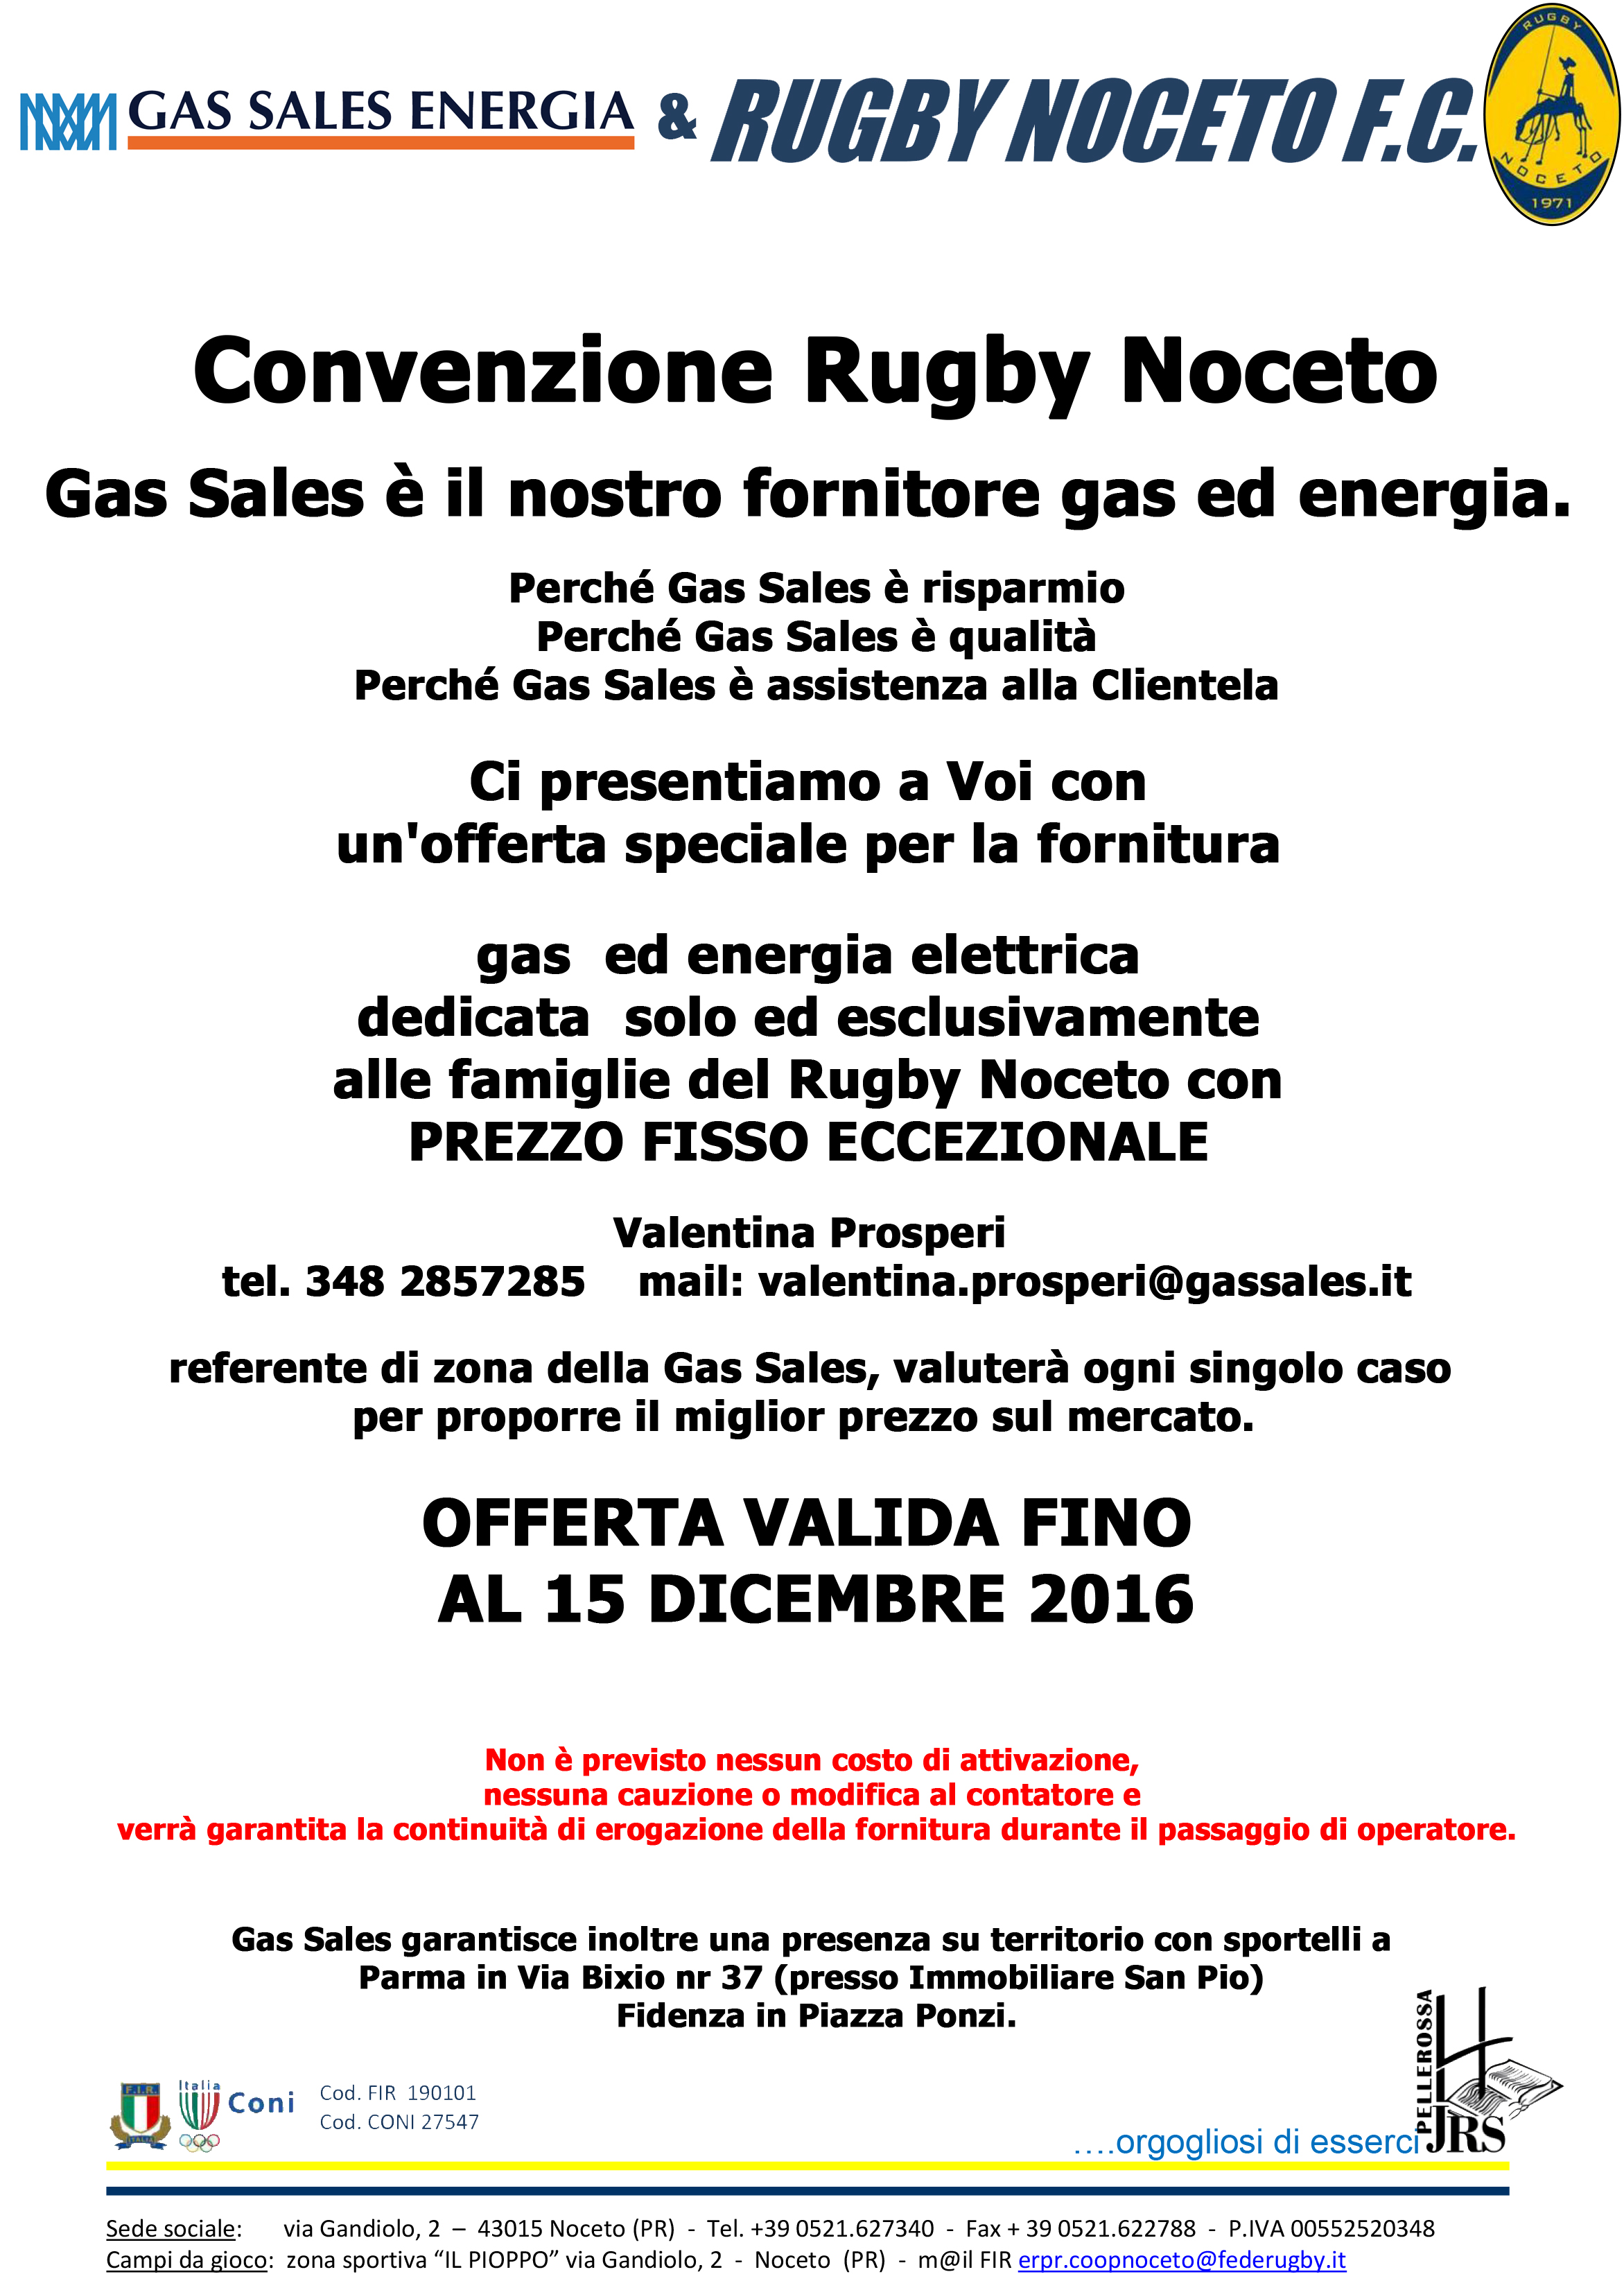 Gas Sales Energia e Rugby Noceto F.C. insieme